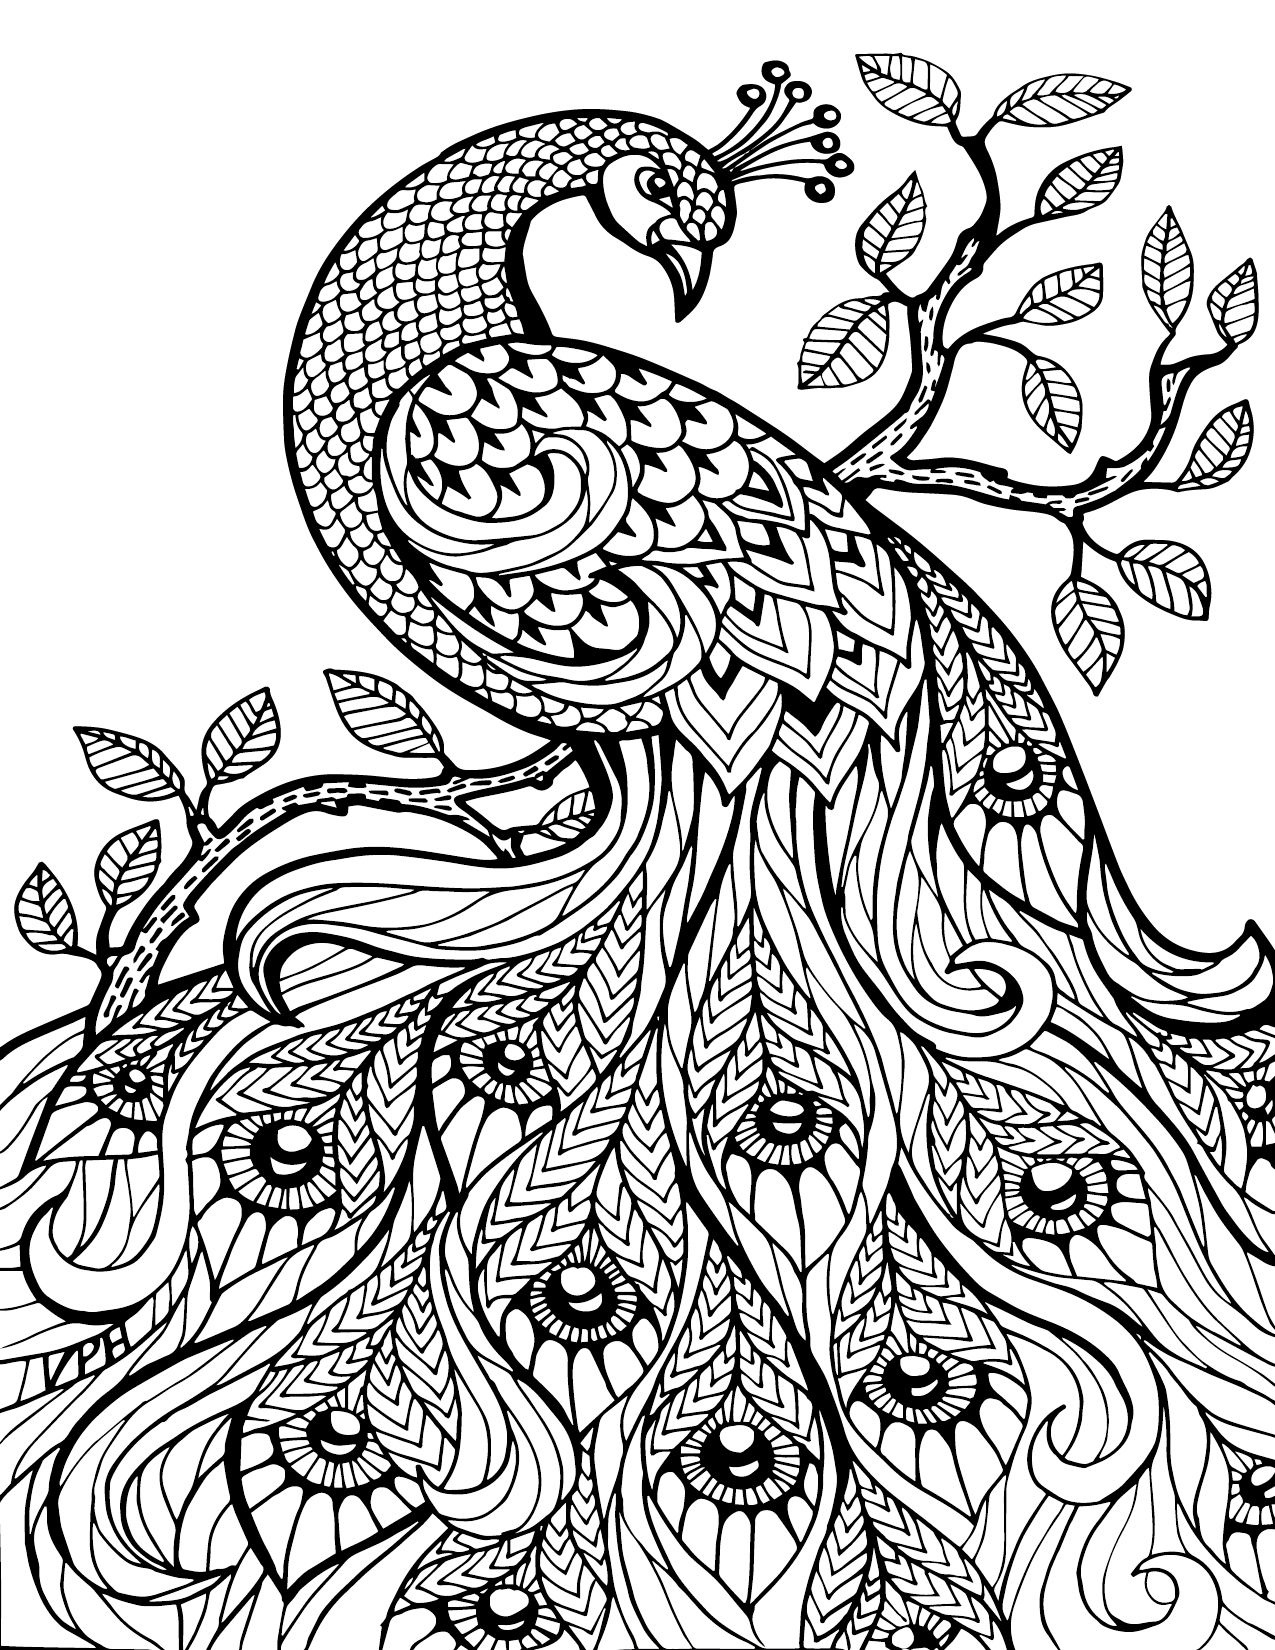 Free Printable Coloring Pages For Adults Only Image 36 Art - Free Printable Peacock Pictures